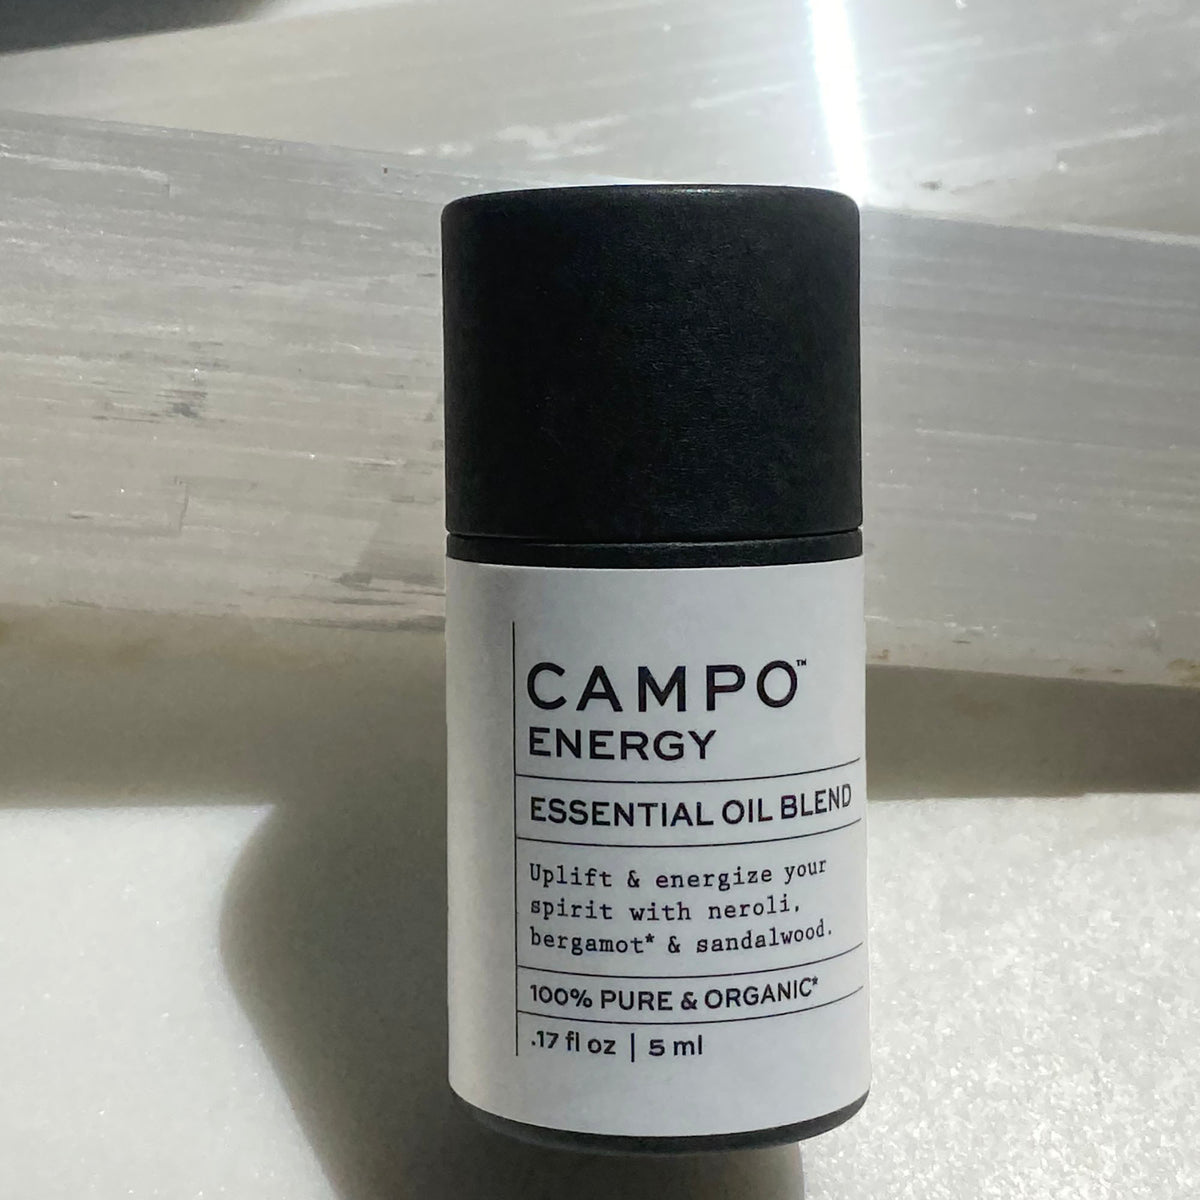 Campo Beauty ENERGY Blend 5 ml and 15 ml Essential Oil. Restores a sense of vitality and alertness. An uplifting blend of 100% pure essential oils with rich citrus notes of Italian Neroli Orange Blossom, Bergamot, Sweet Orange, and Bitter Orange with a hint of Australian Sandalwood. Feel the energy inside and out.